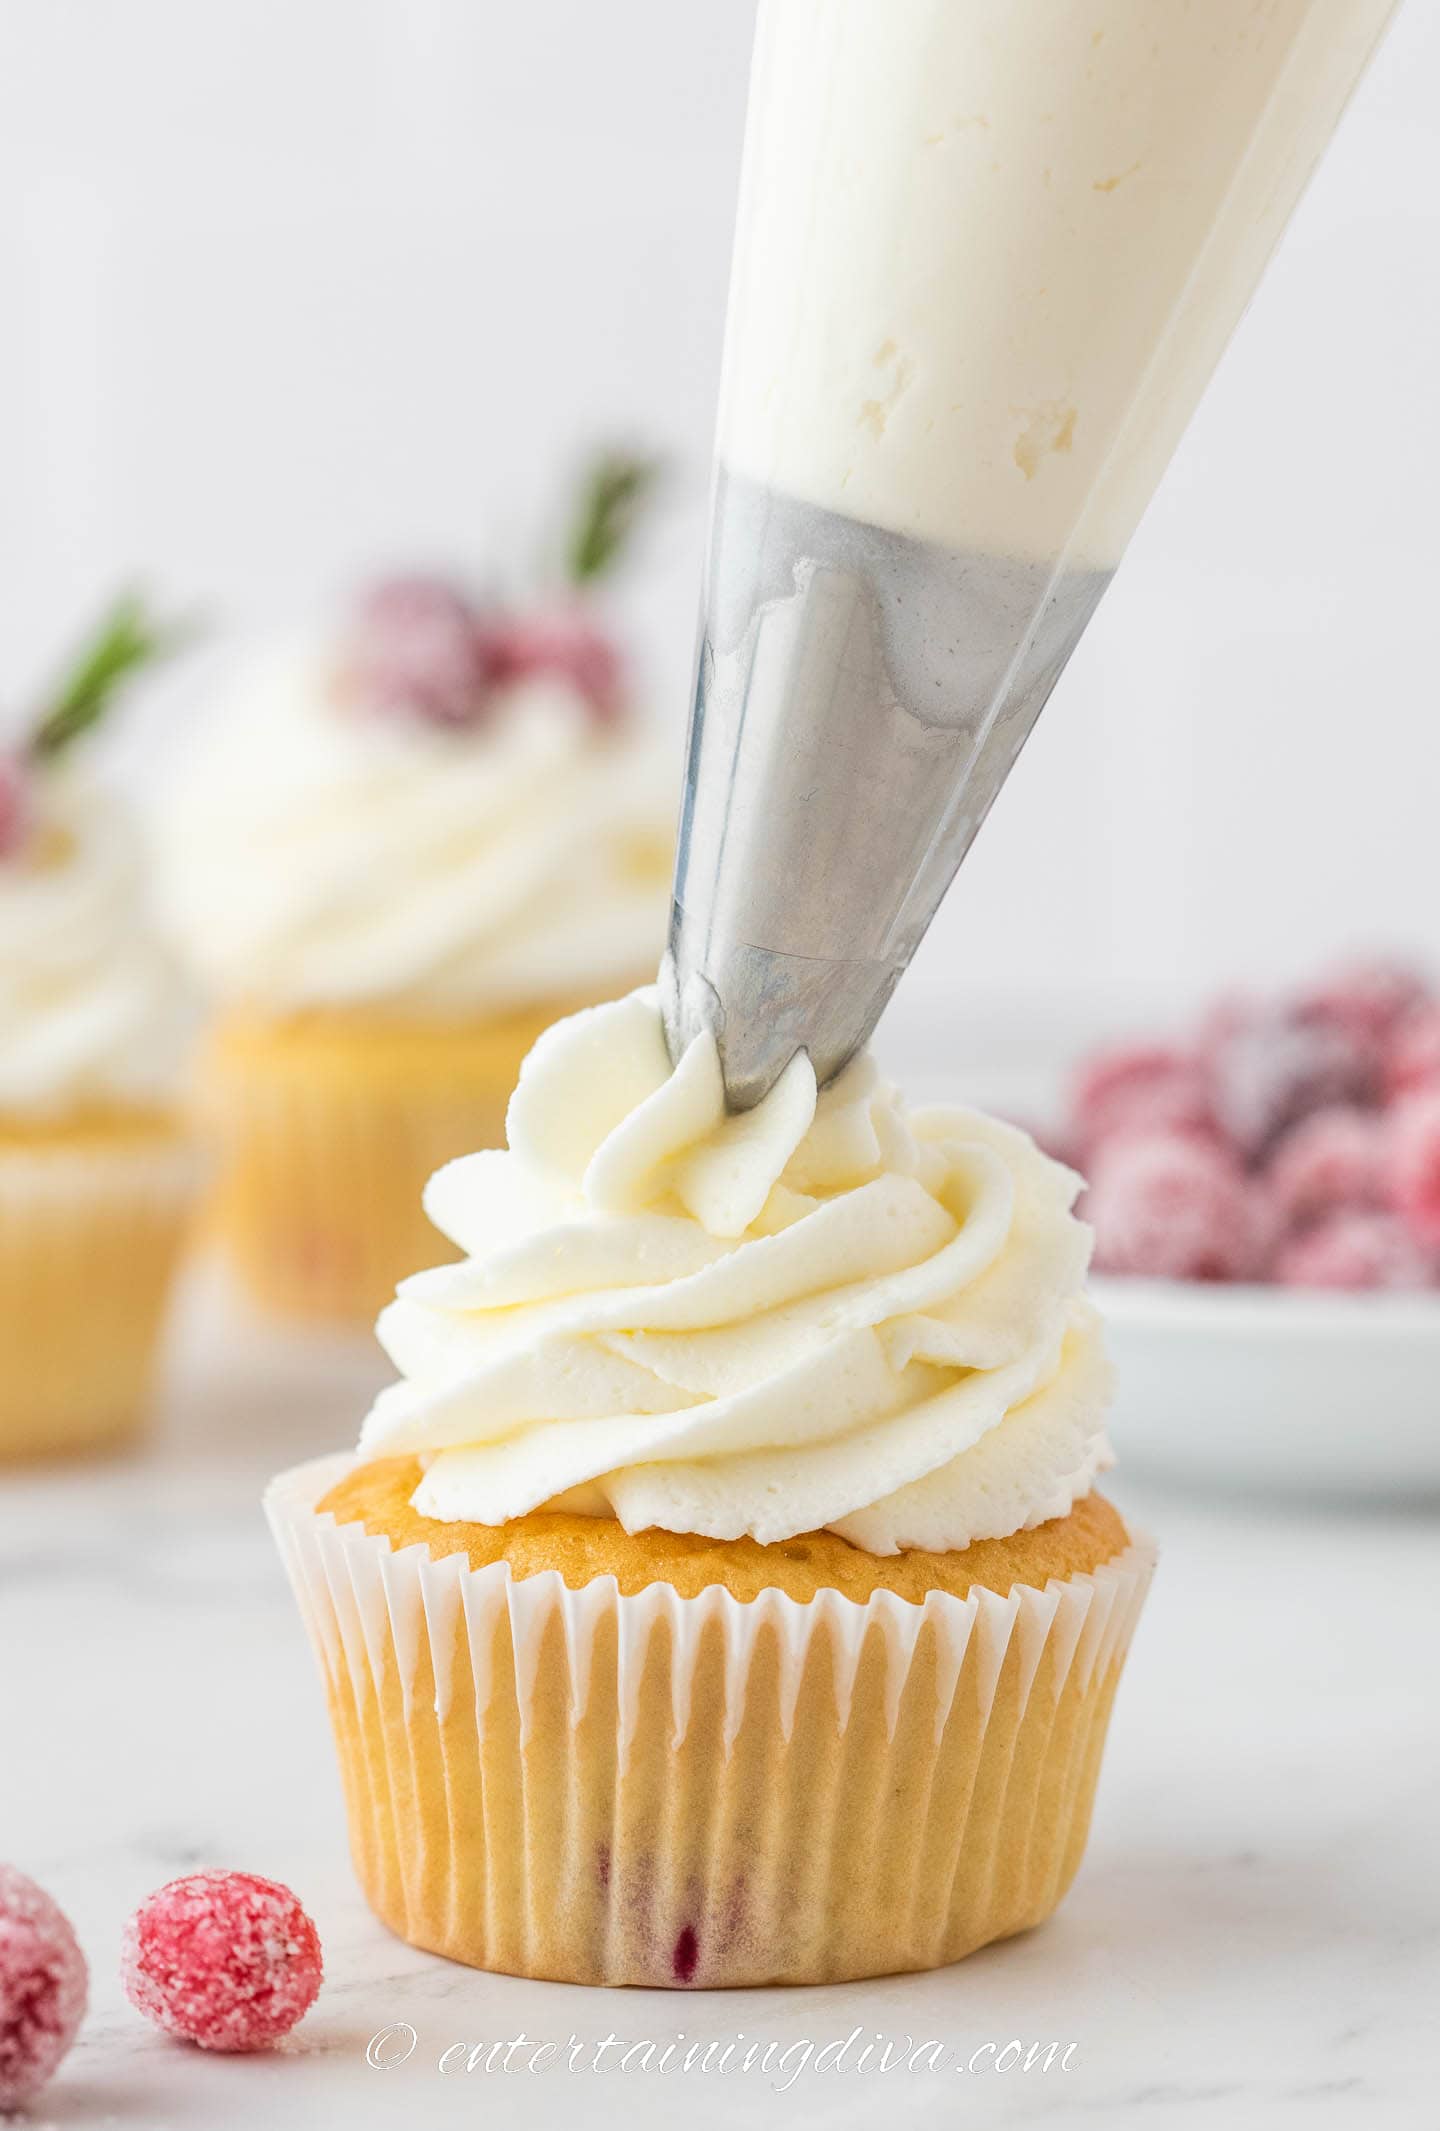 white chocolate buttercream frosting being piped onto a white chocolate cranberry cupcake